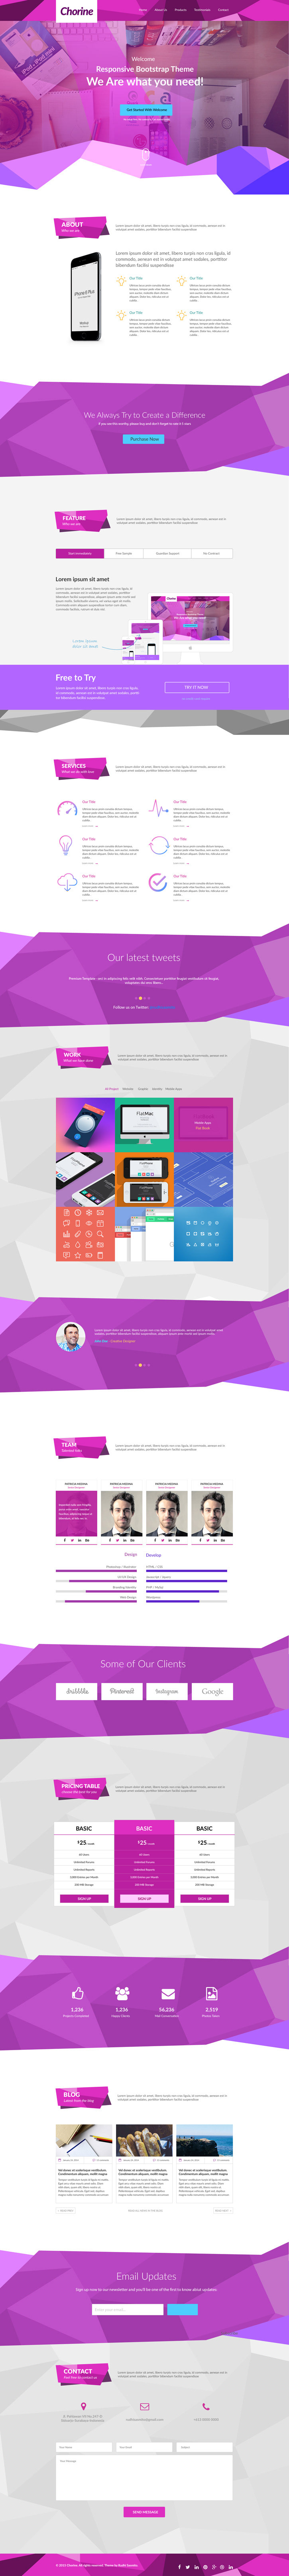 onepage Webdesign landing pag creative agency Business Company free psd